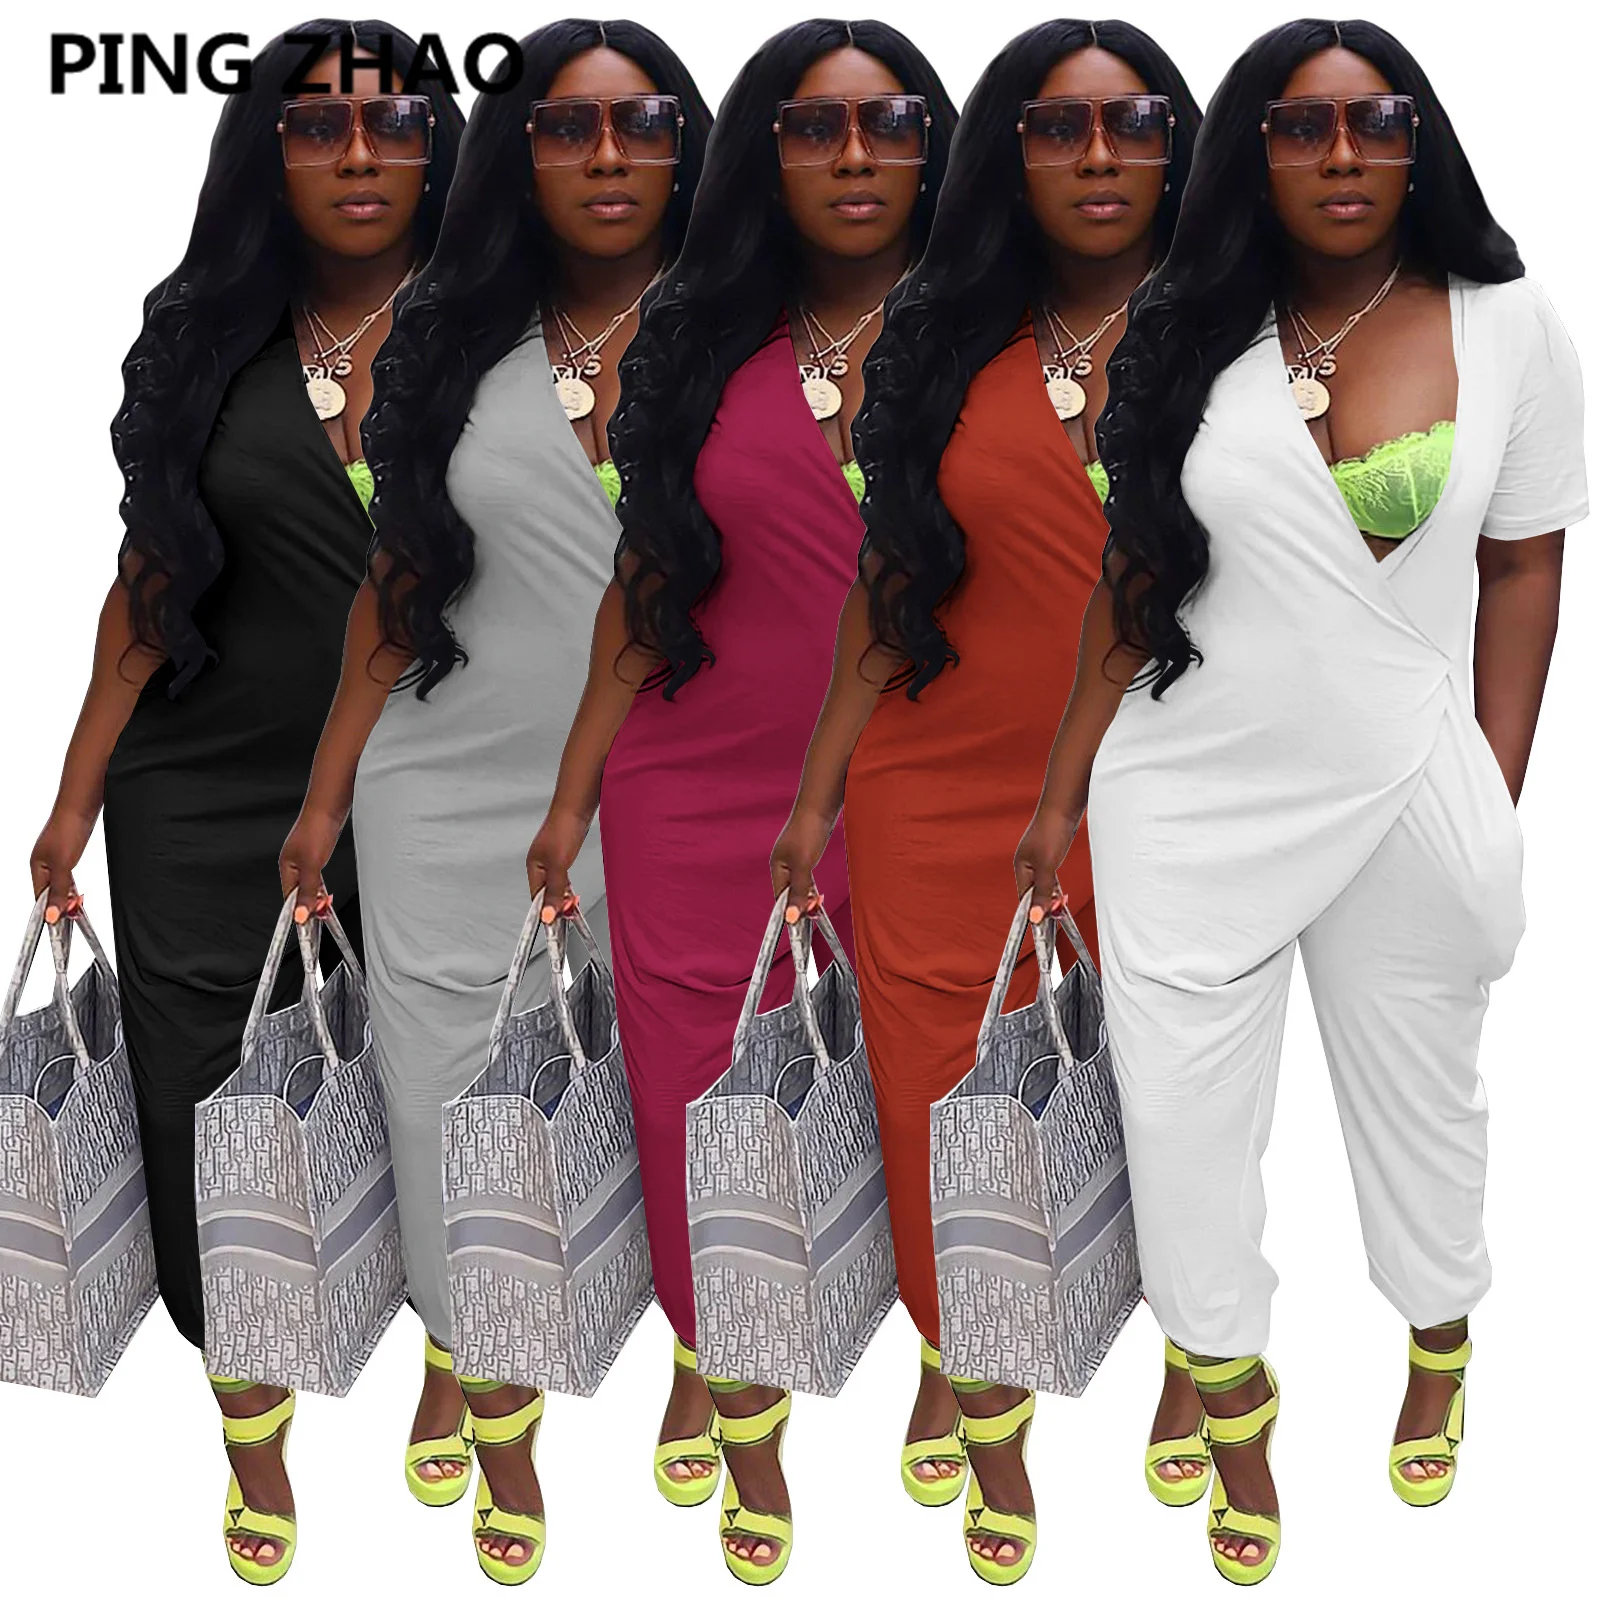 

PING ZHAO Women Short Sleeve Draped V-neck Jumpsuit 2022 Casual Solid with Poket Summer One Piece Overall Outfit Playsuit